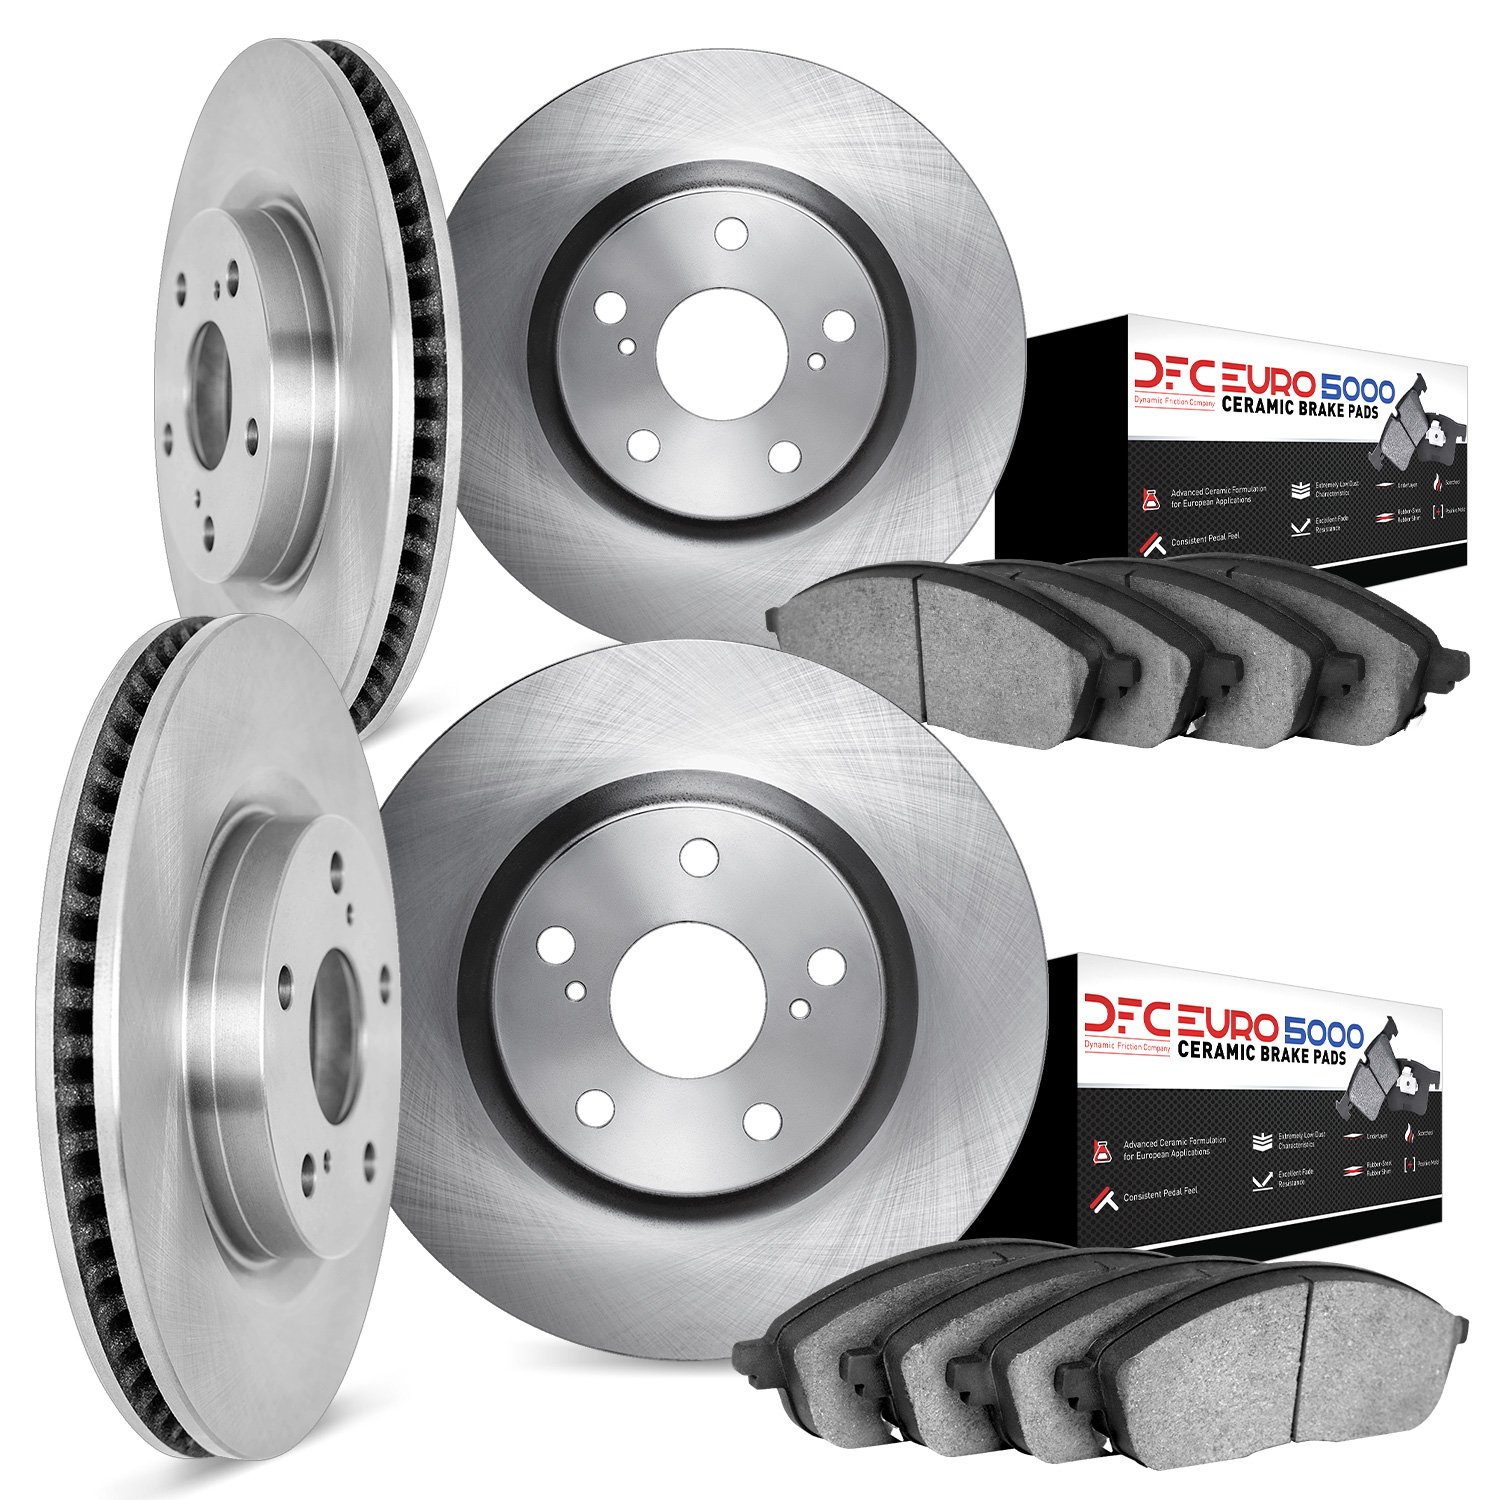 6604-10487 Brake Rotors w/5000 Euro Ceramic Brake Pads, 2002-2010 GM, Position: Front and Rear